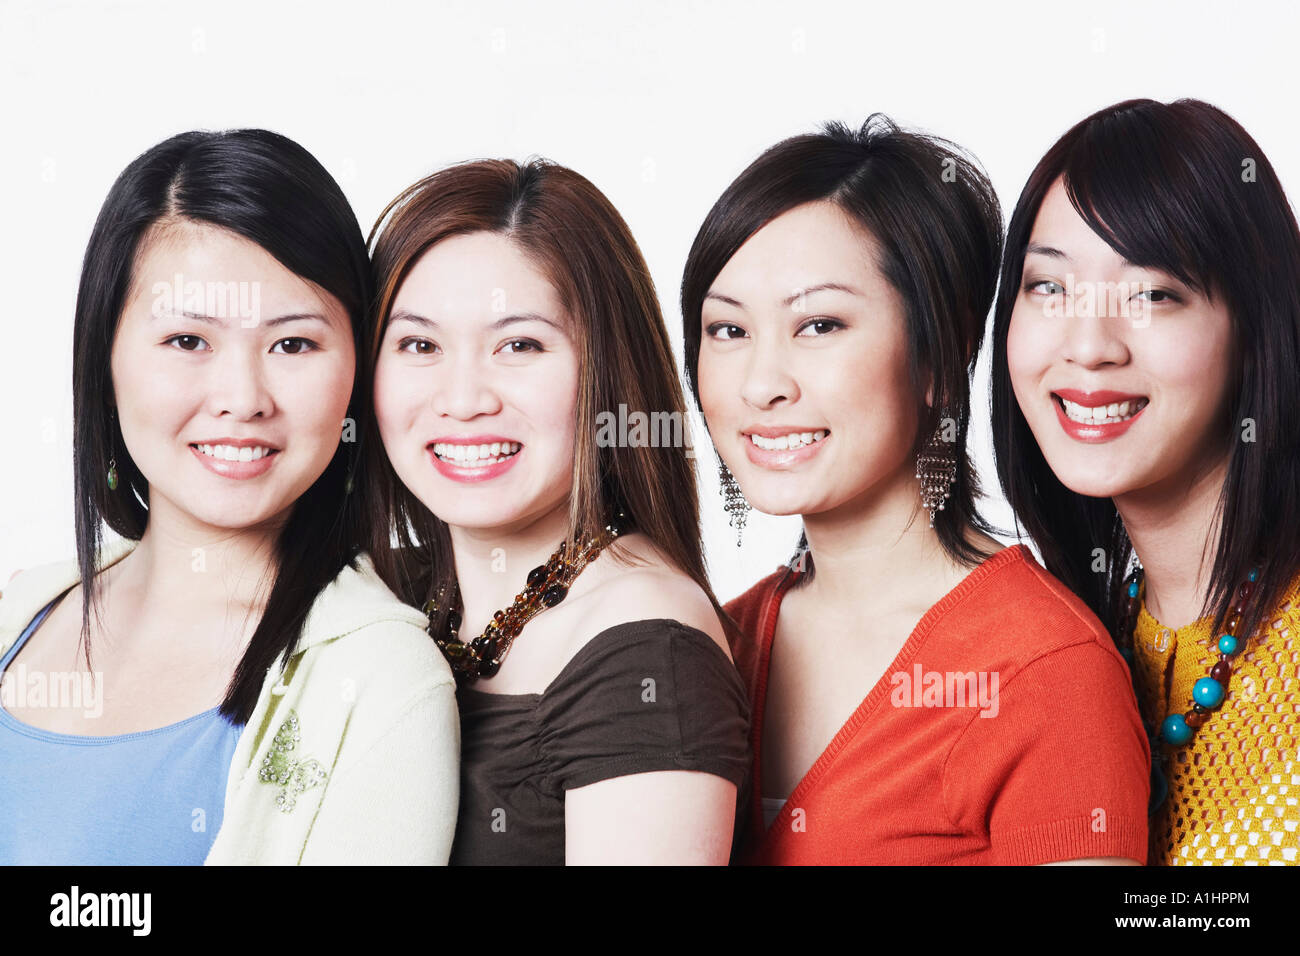 Portrait of four young women smiling Stock Photo